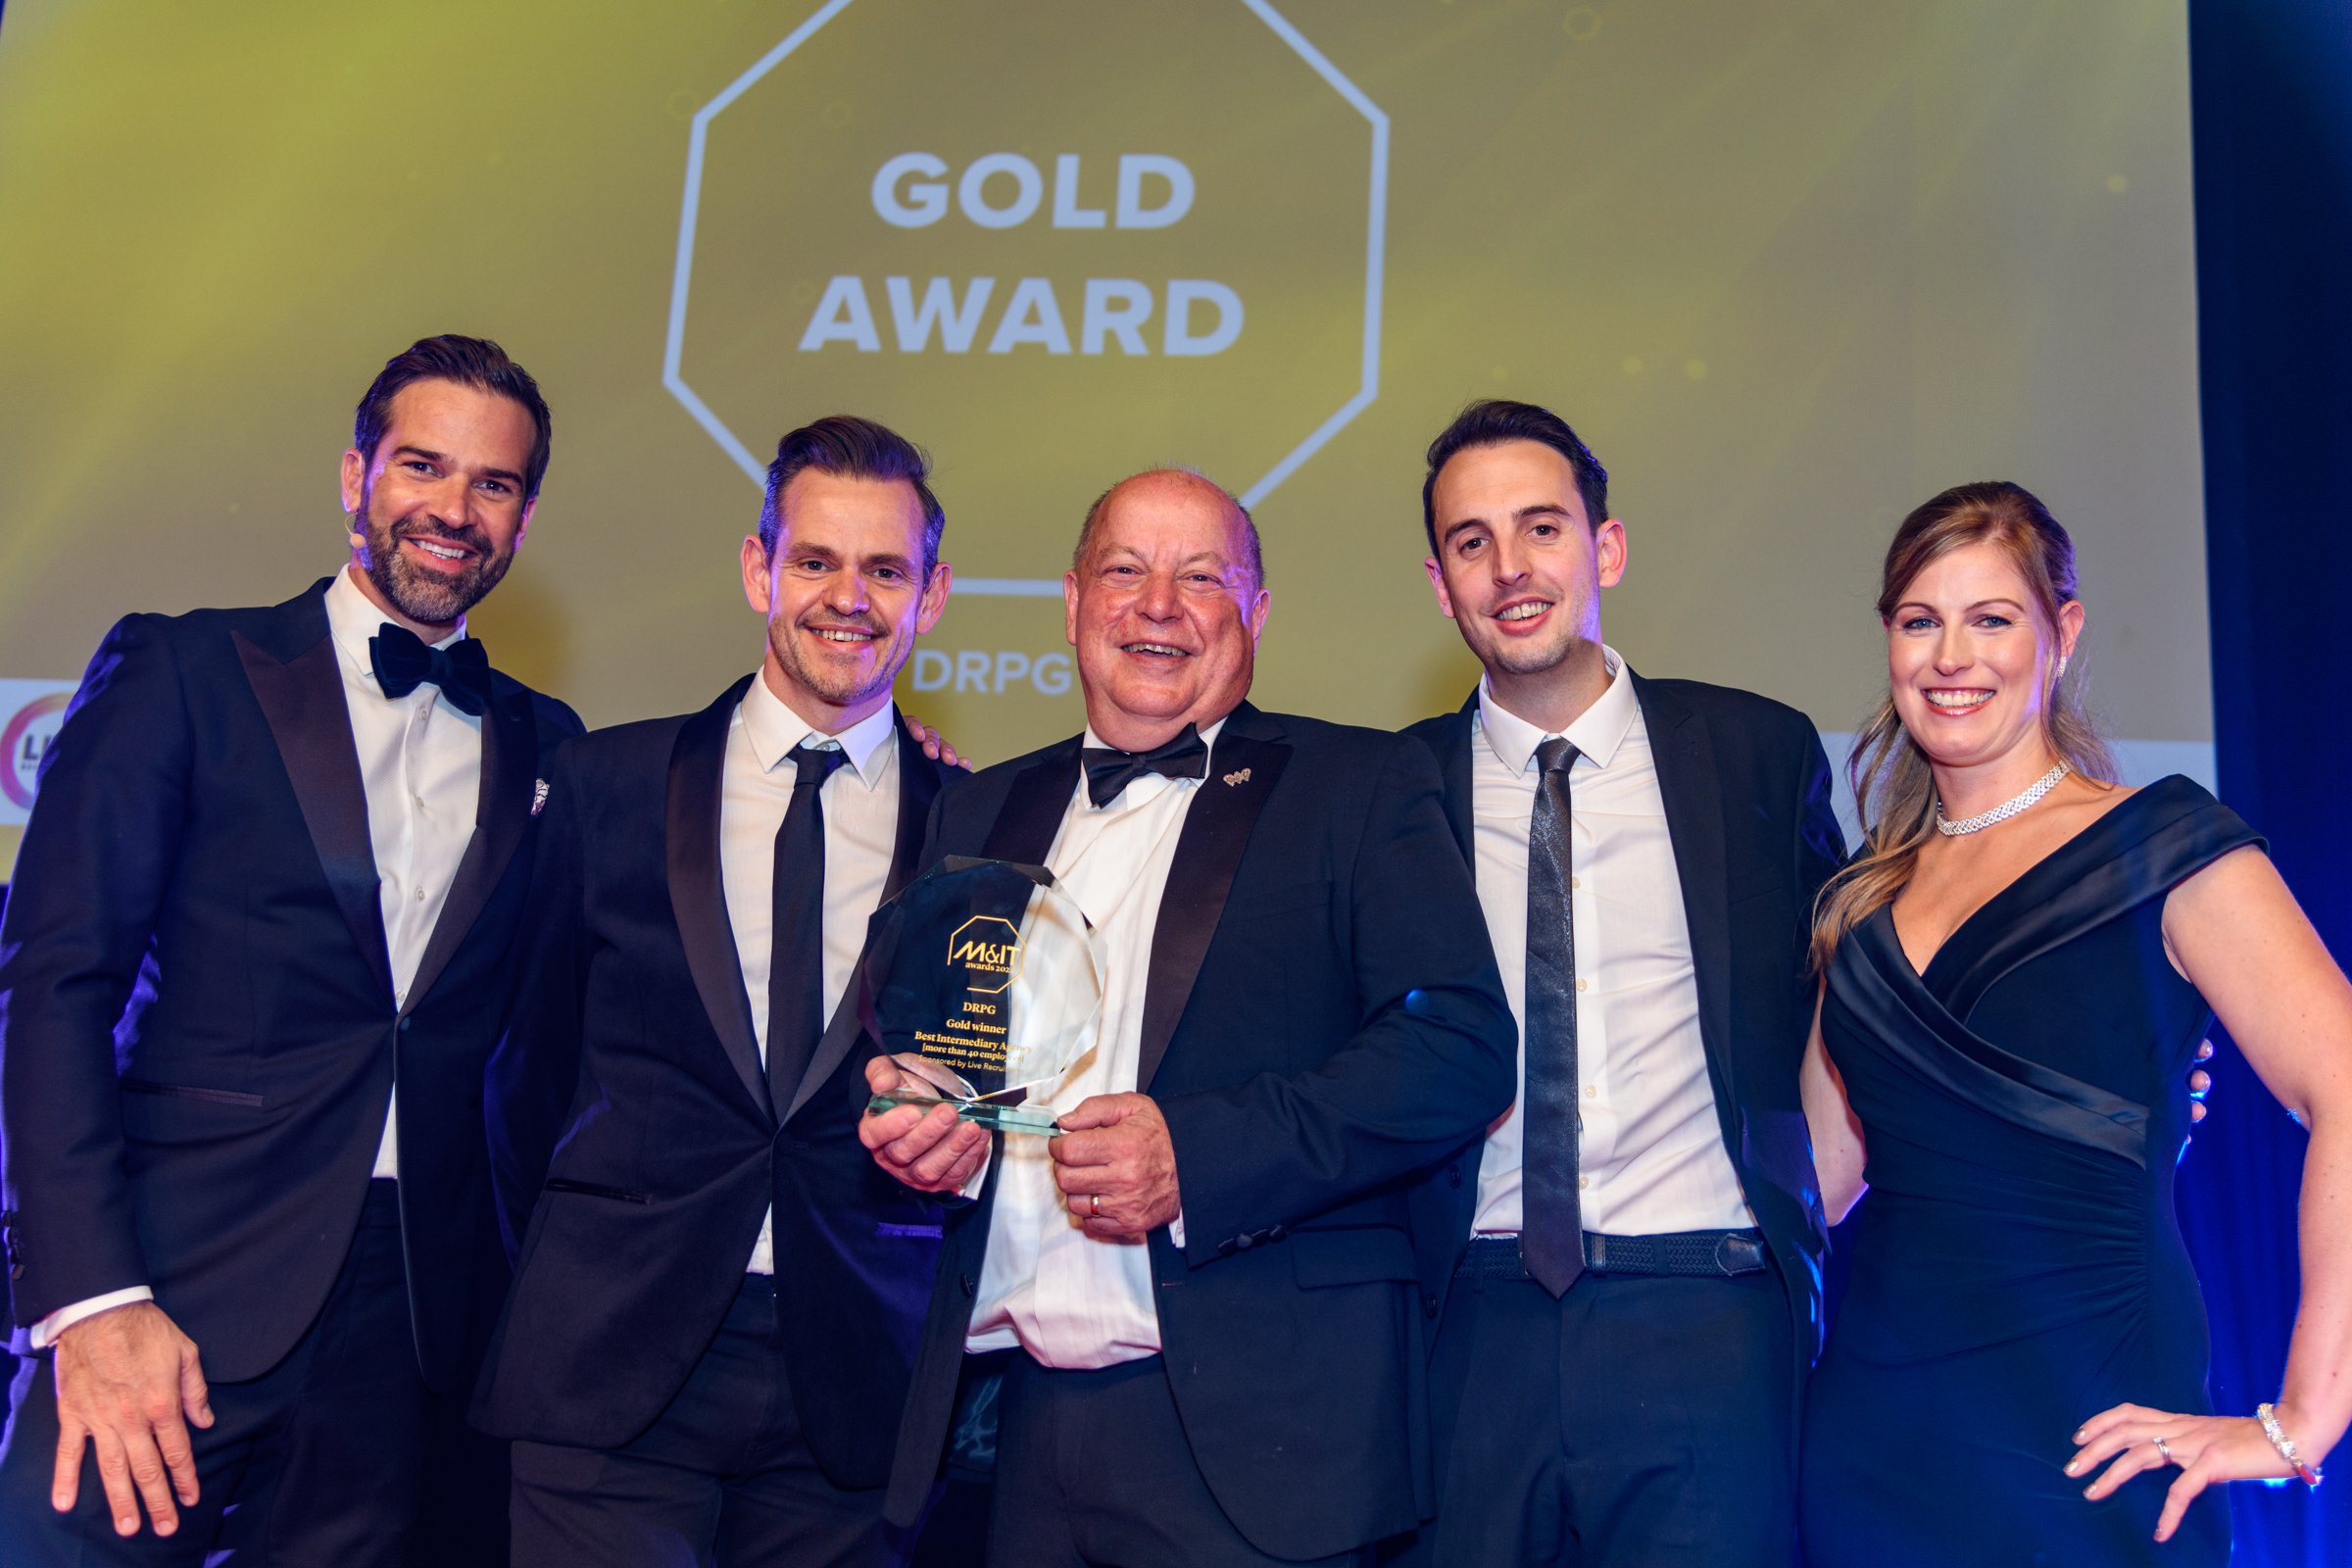 From Left to Right: TV Presenter Gethin Jones, DRPG Director of Events Matt Franks, CEO Dale Parmenter, Senior Account Director Richard Davies at the 2021 M&IT awards